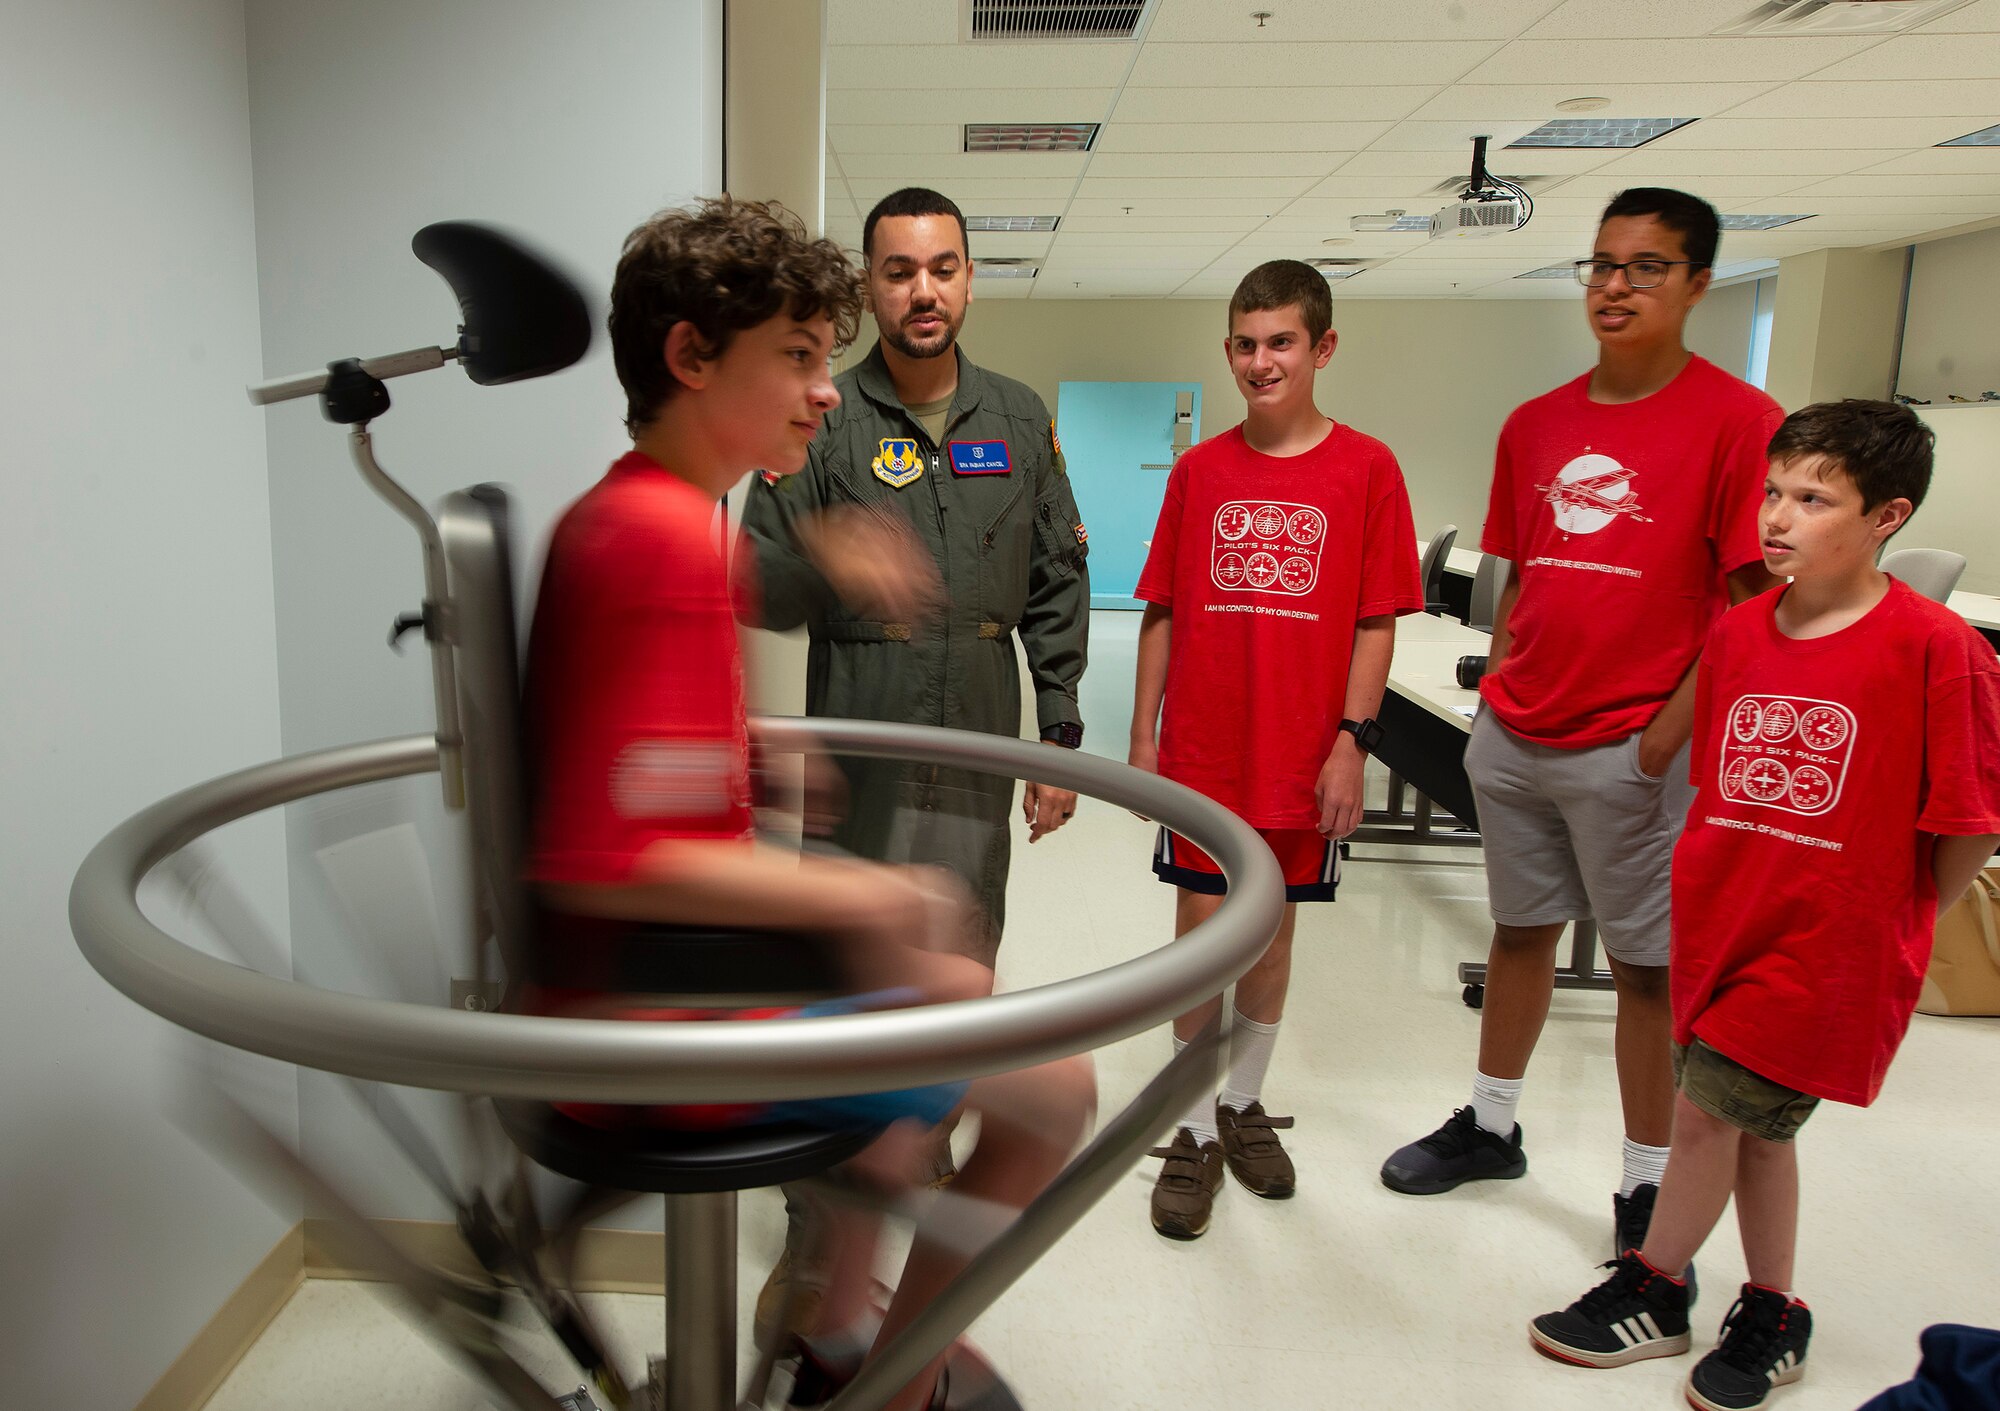 Senior Airman Fabian Cancel, U.S. School of Aerospace Medicine, spins a Space Camp participant in a Barany chair June 15, 2021, during a visit to the school on Wright-Patterson Air Force Base, Ohio. Air Camp is a STEM aviation program that is trying to raise interests in aviation amongst middle school students. (U.S. Air Force photo by R.J. Oriez)